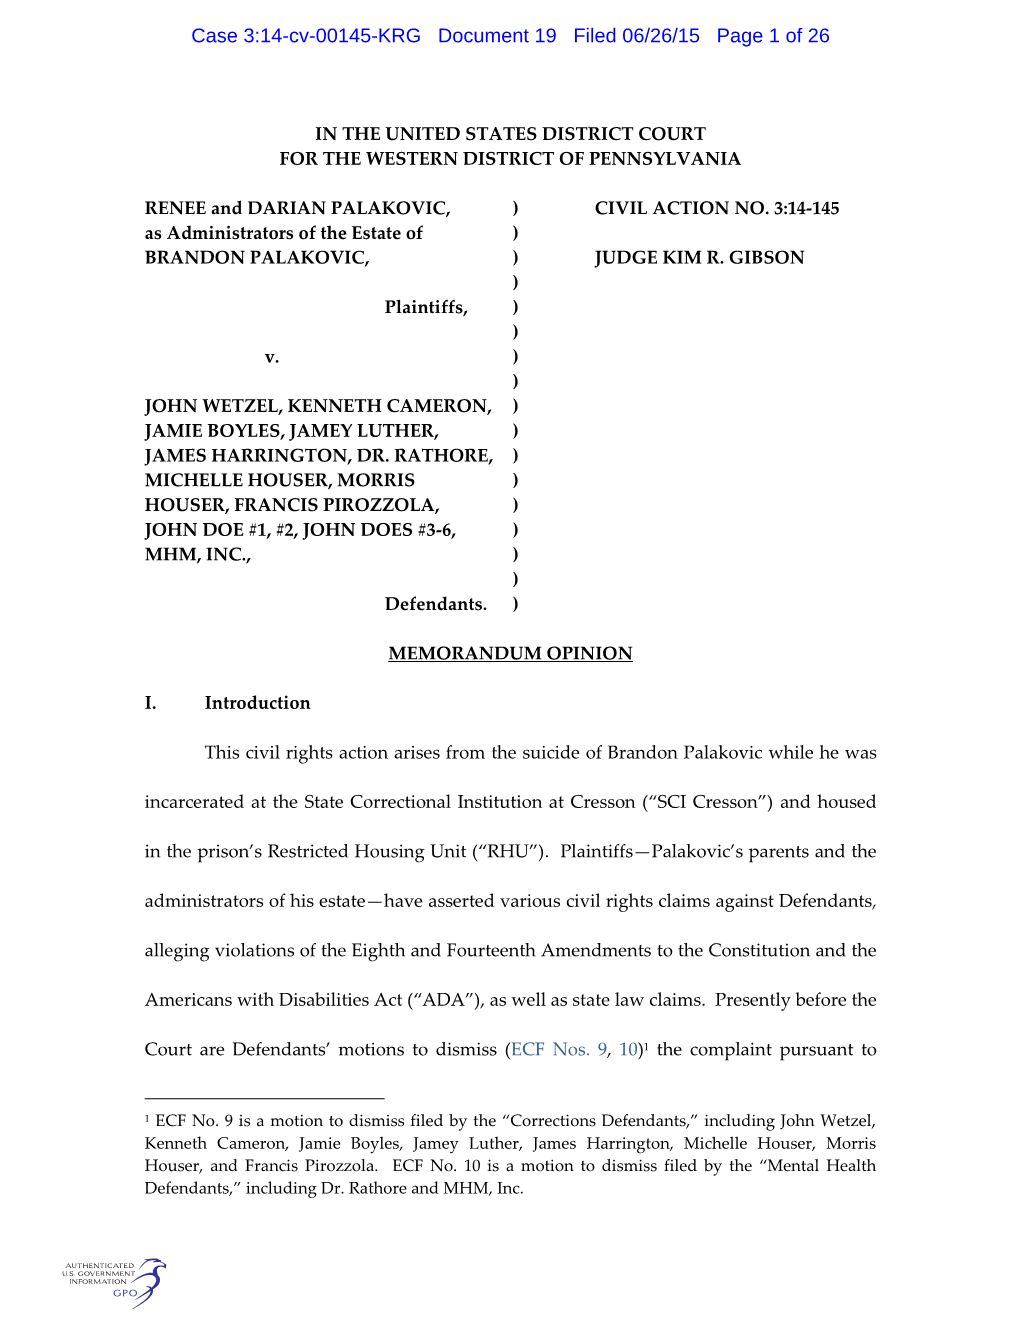 Case 3:14-Cv-00145-KRG Document 19 Filed 06/26/15 Page 1 of 26